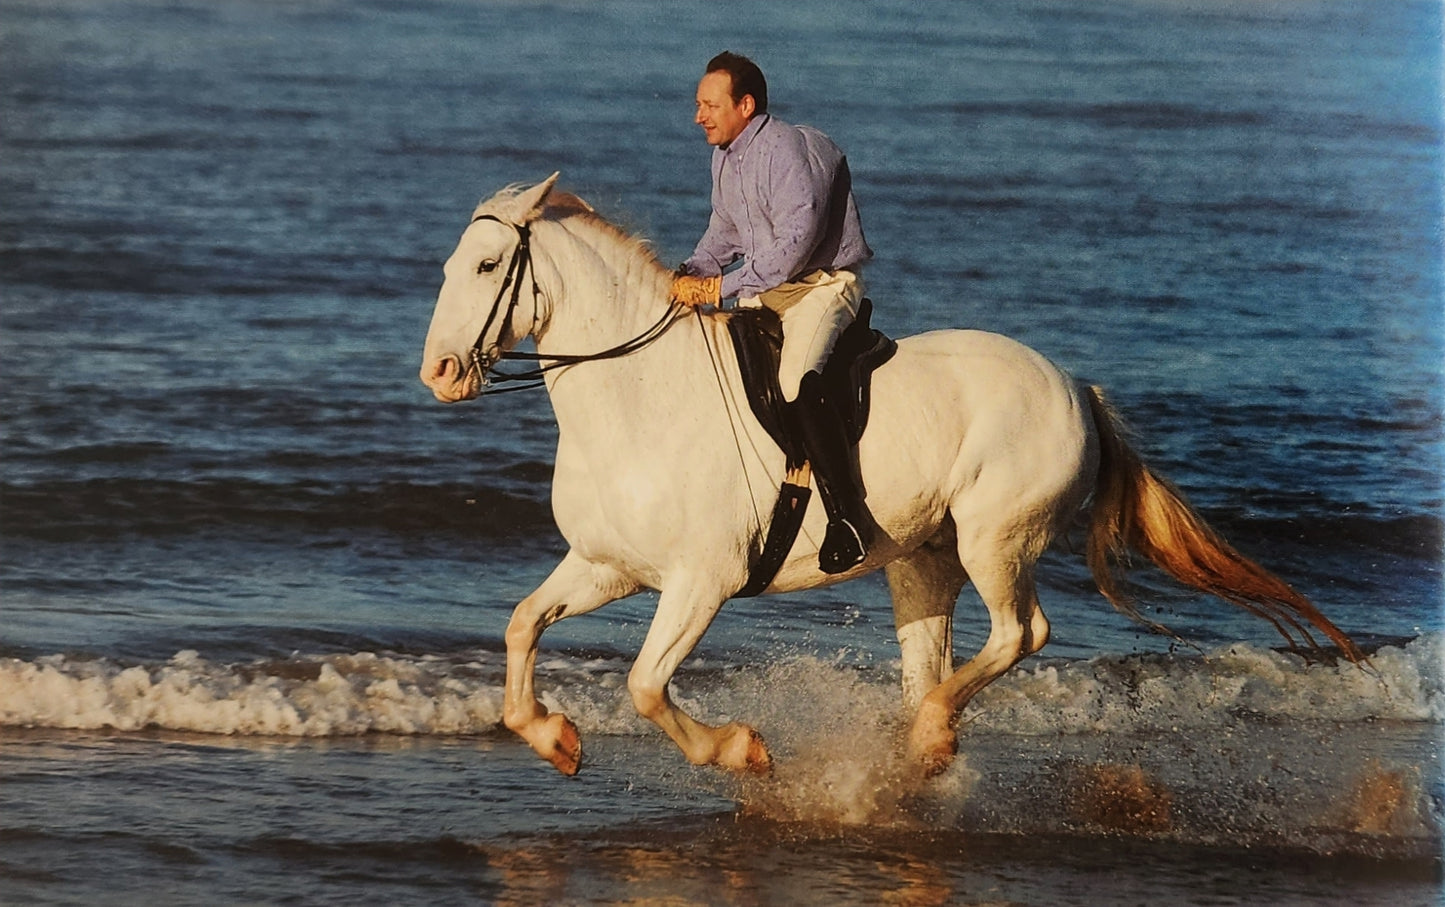 How to create the Perfect Riding Horse